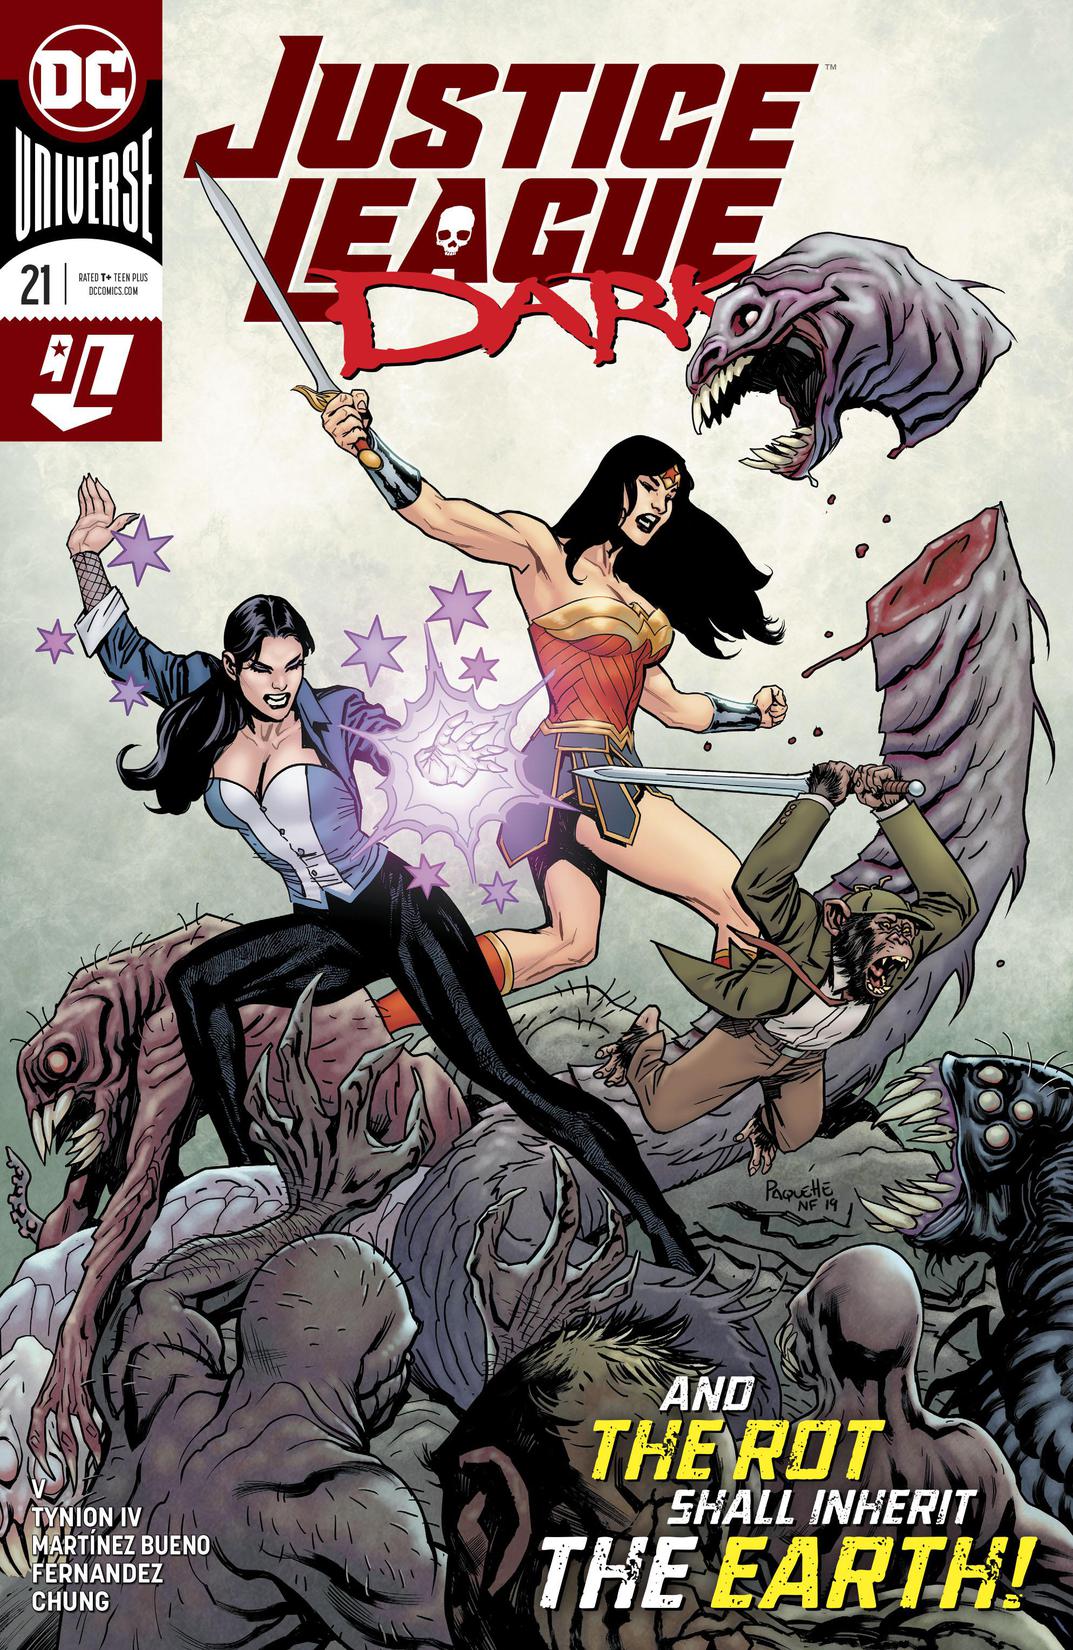 Justice League Dark (2018-) #21 preview images